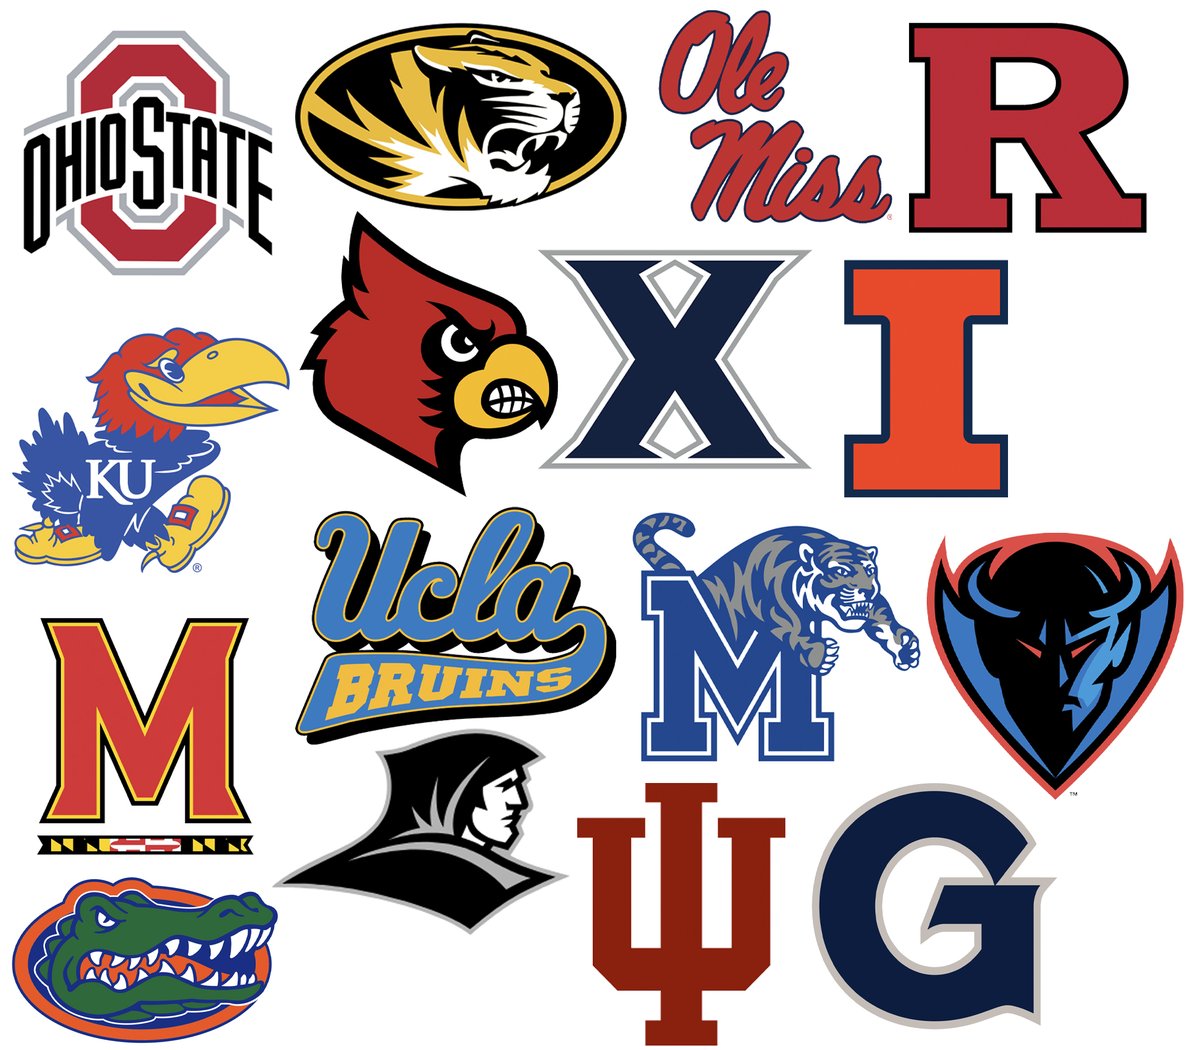 Schools that have been RELOADING in the transfer portal so far🙌